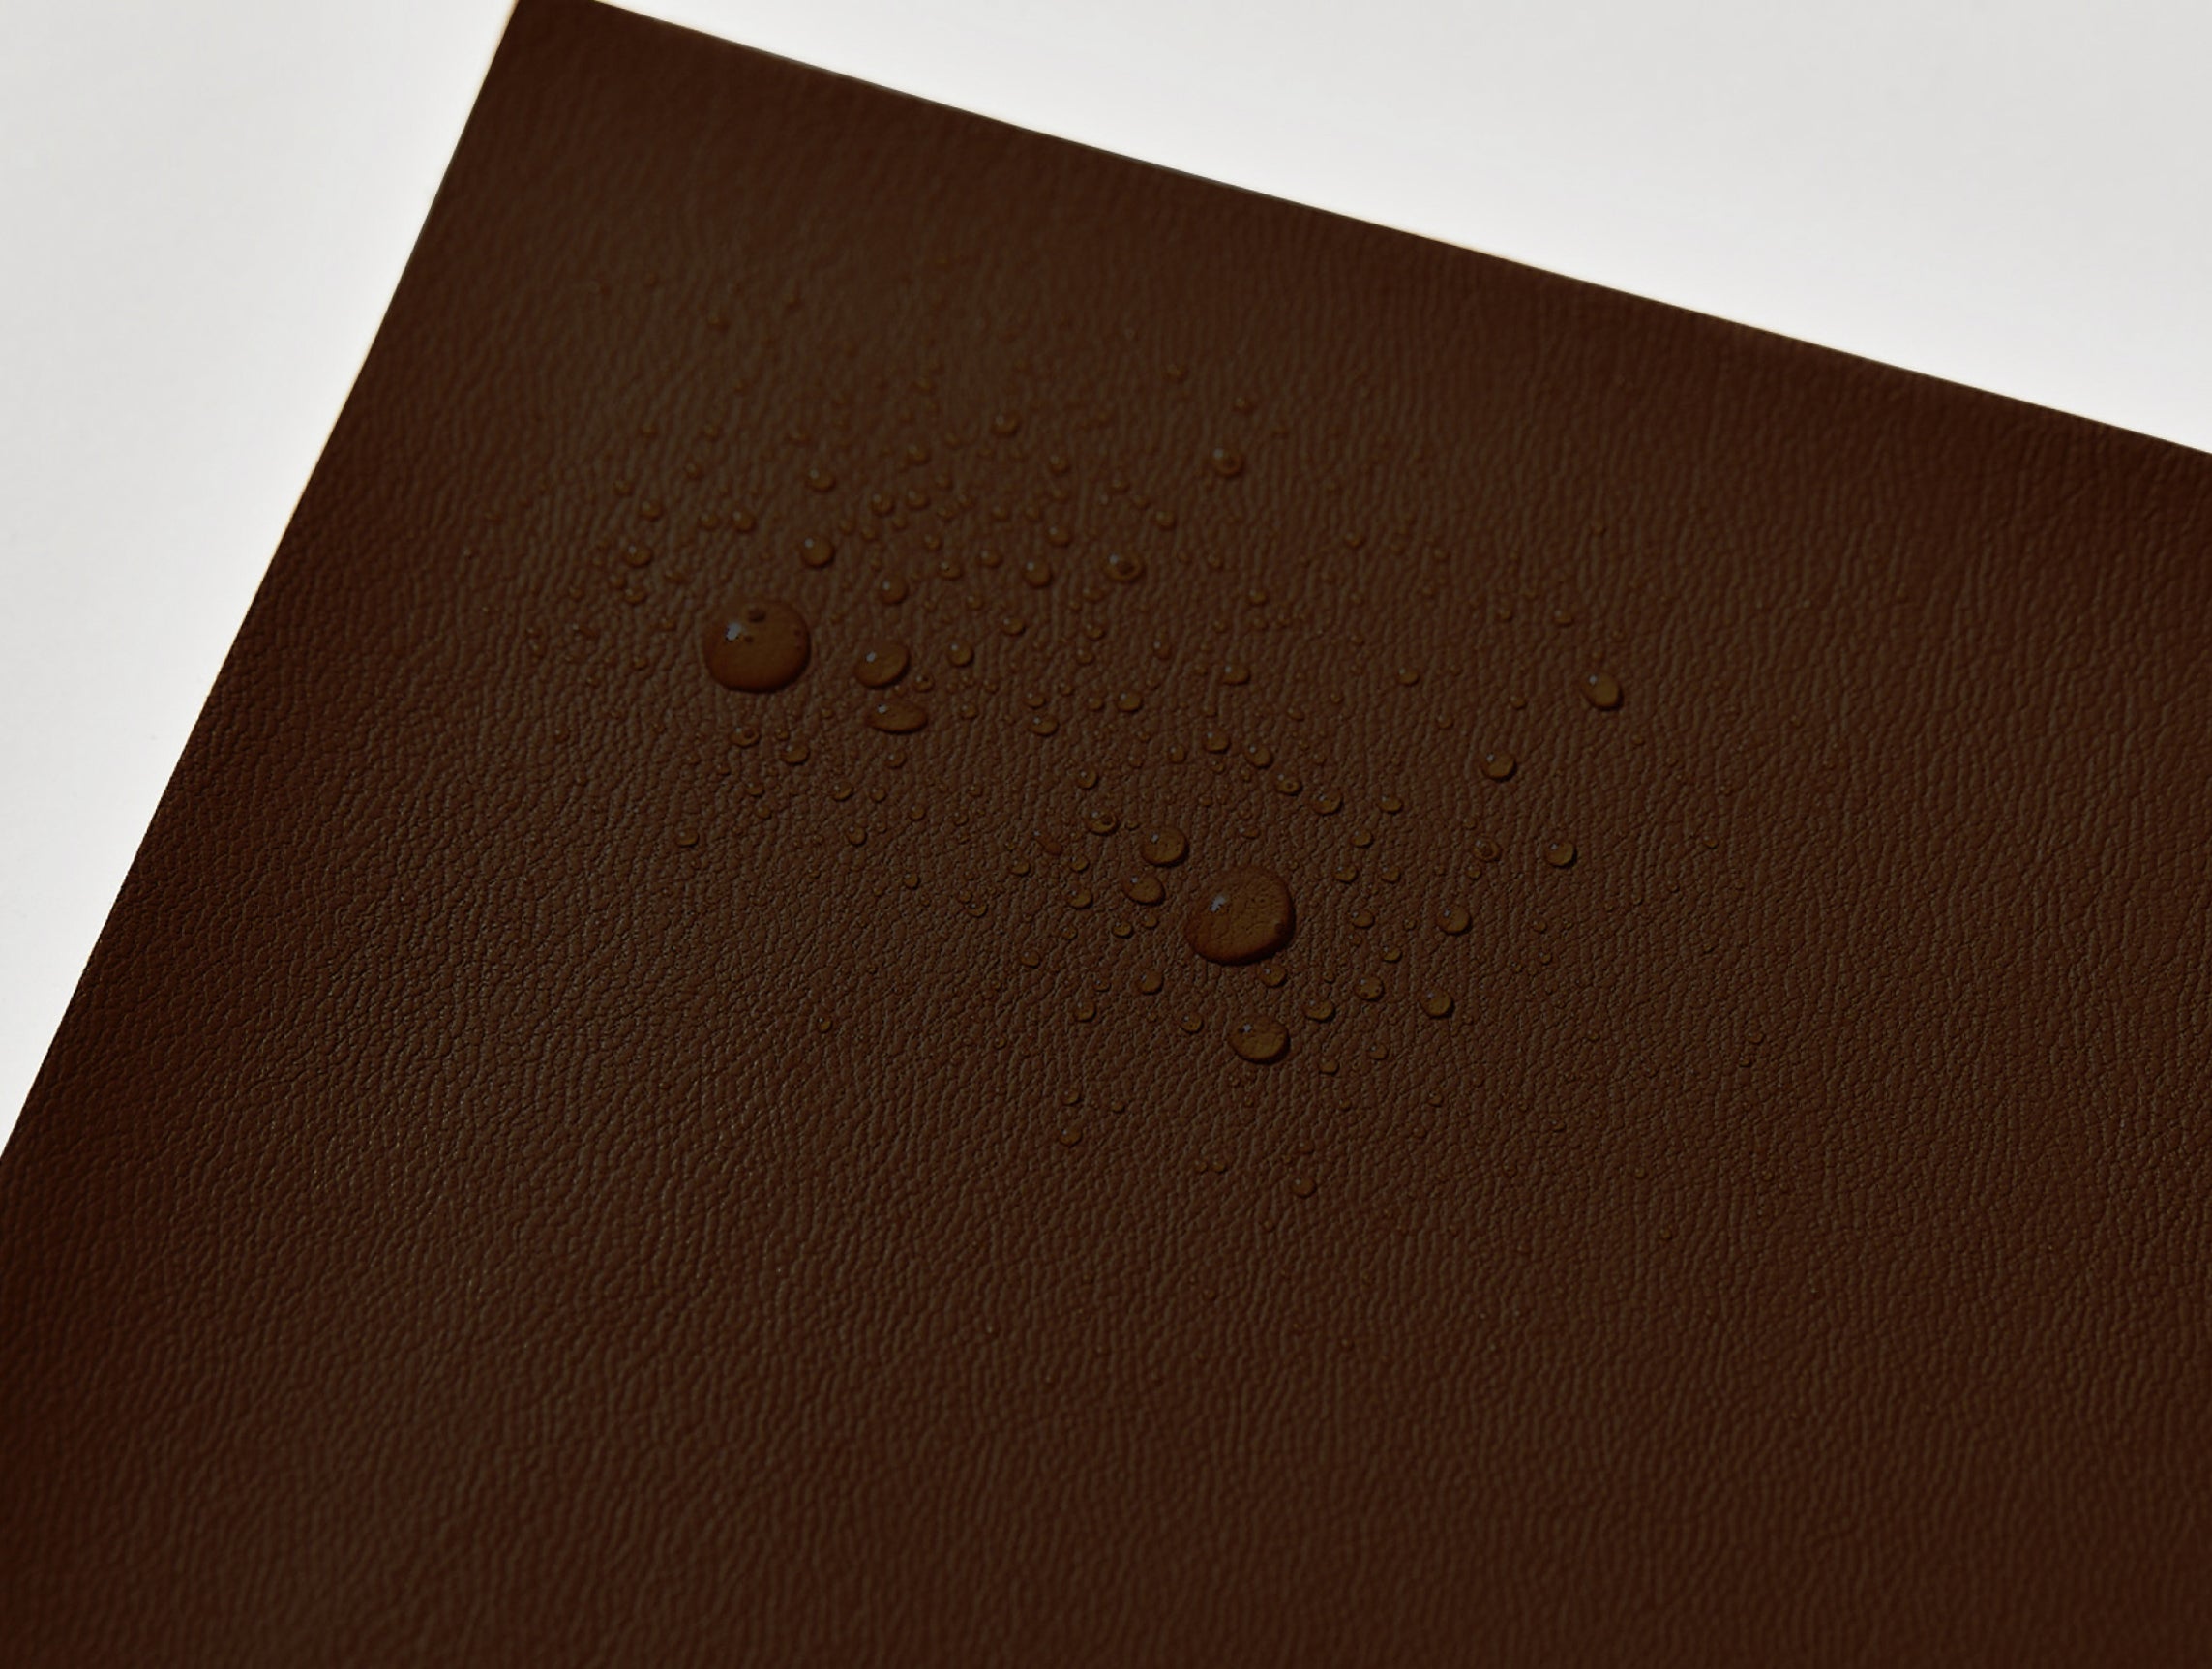 Banbū Leather in Banbū Leather in Carob image 3